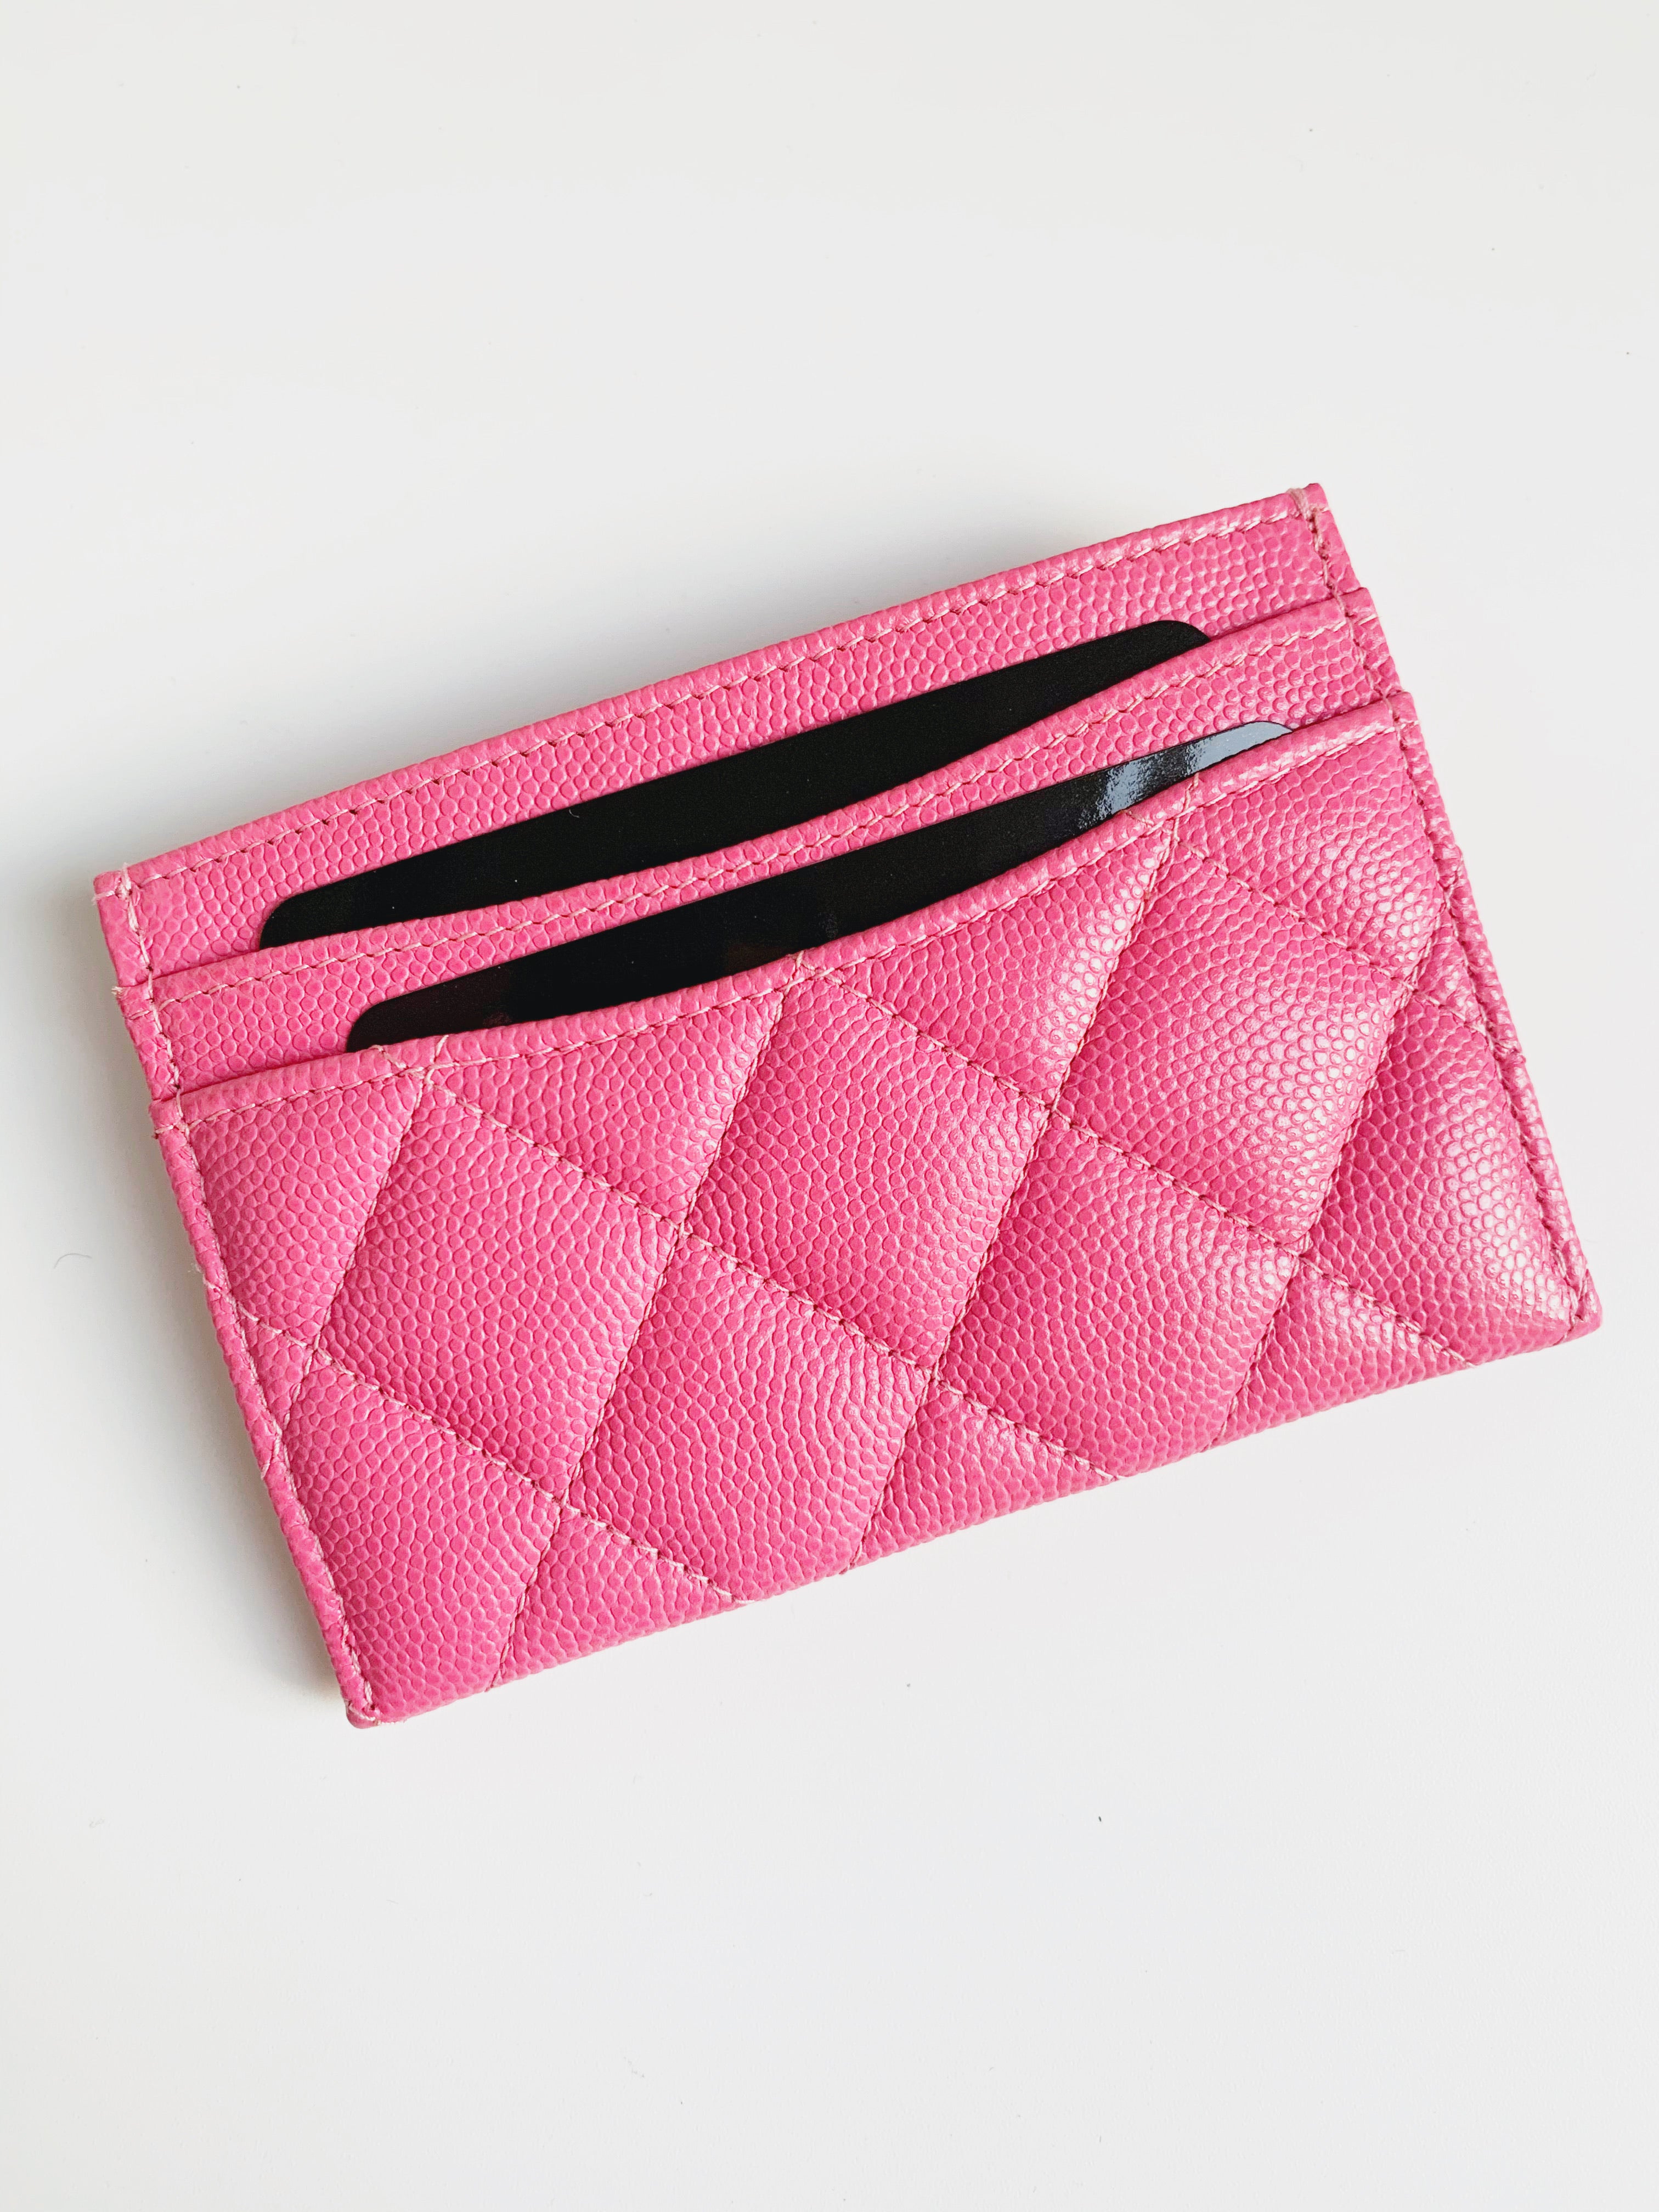 Chanel SLG Snap Cardholder, Pink Caviar with Gold Hardware, New in Box GA003